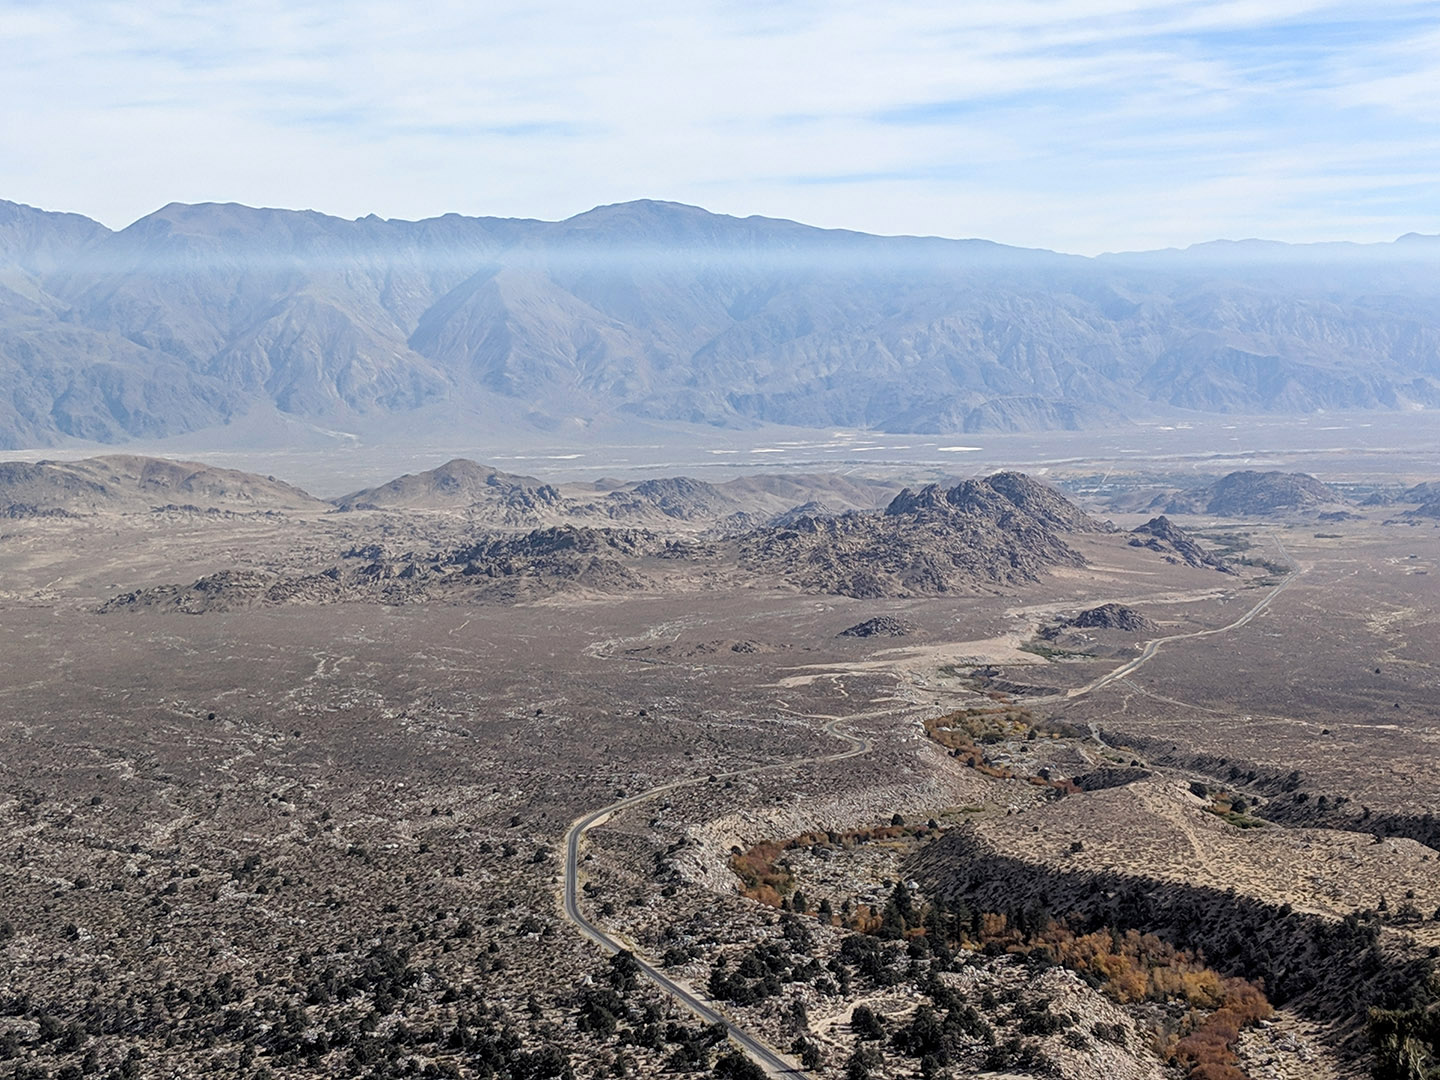 Alabama Hills from above